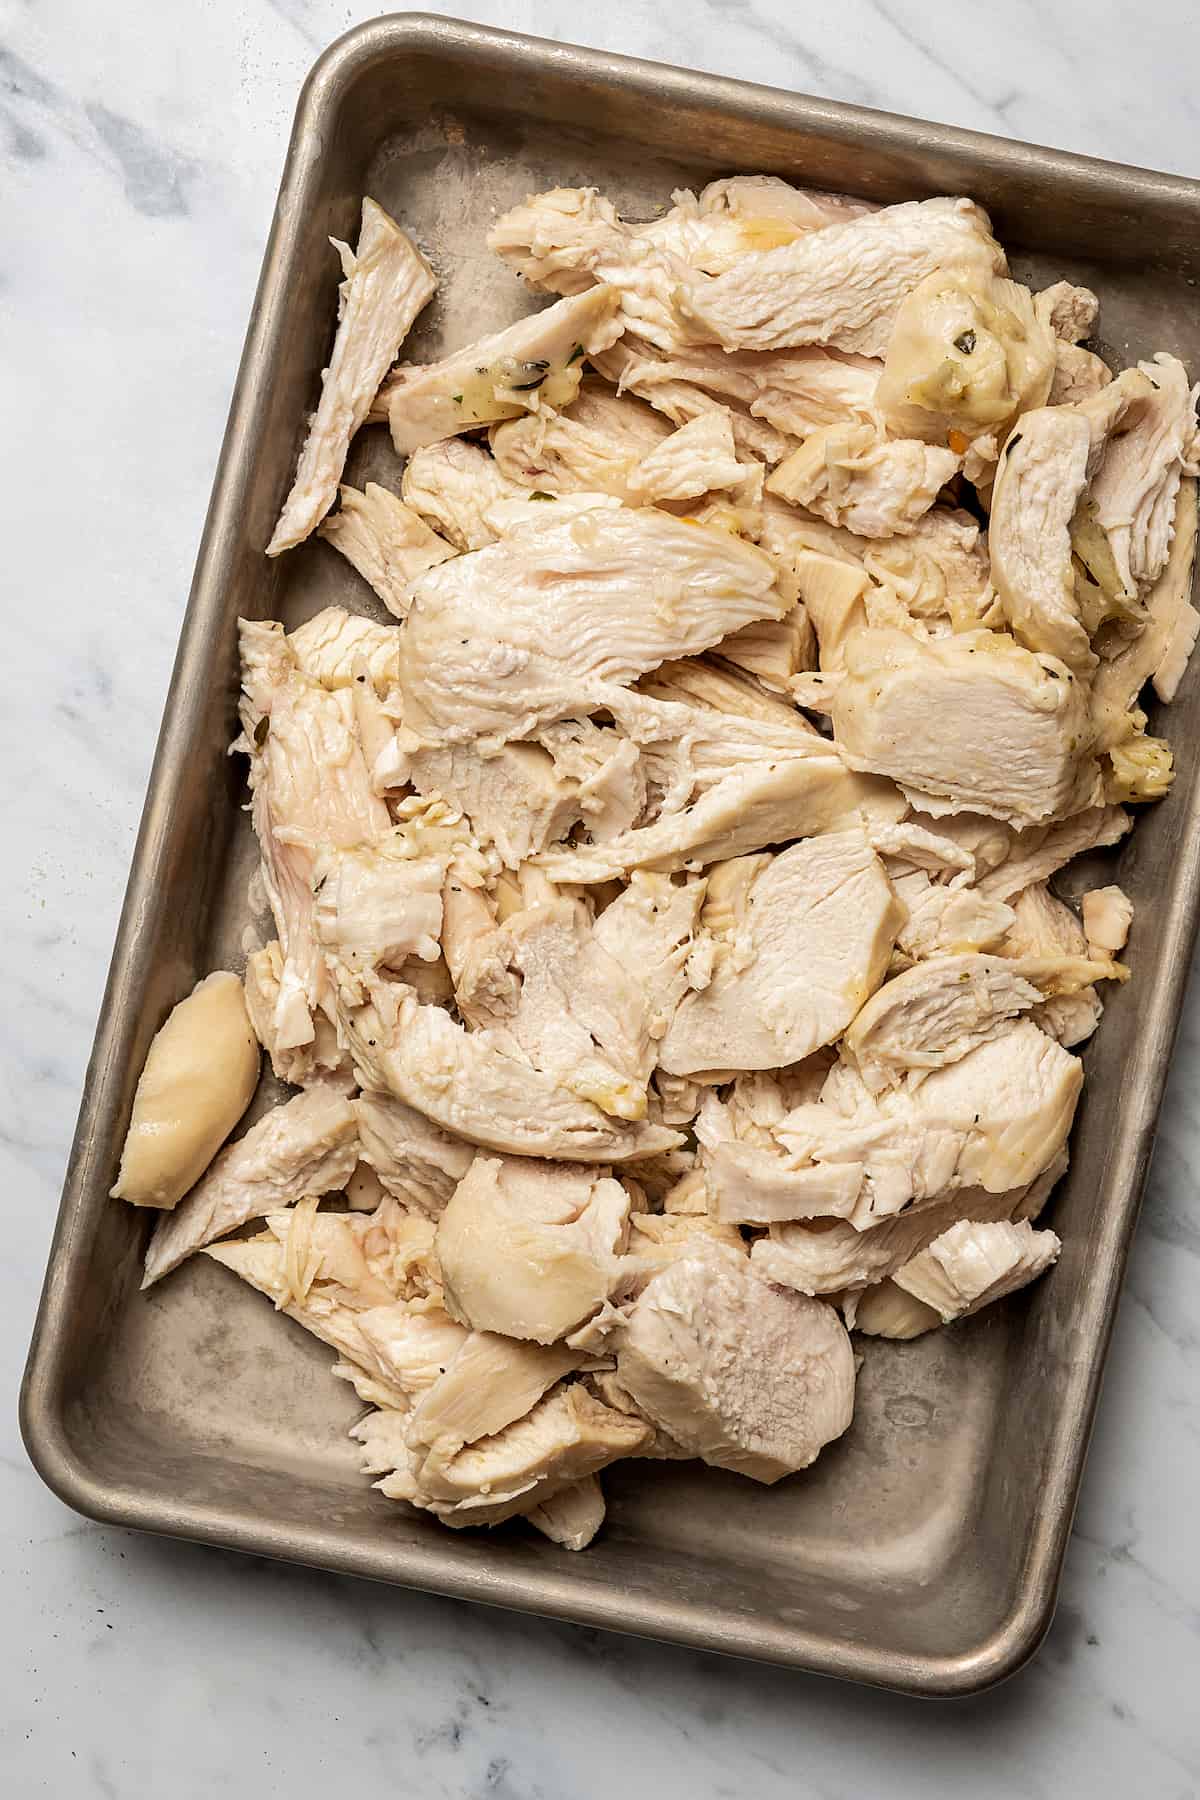 Cut-up, cooked chicken on a tray.